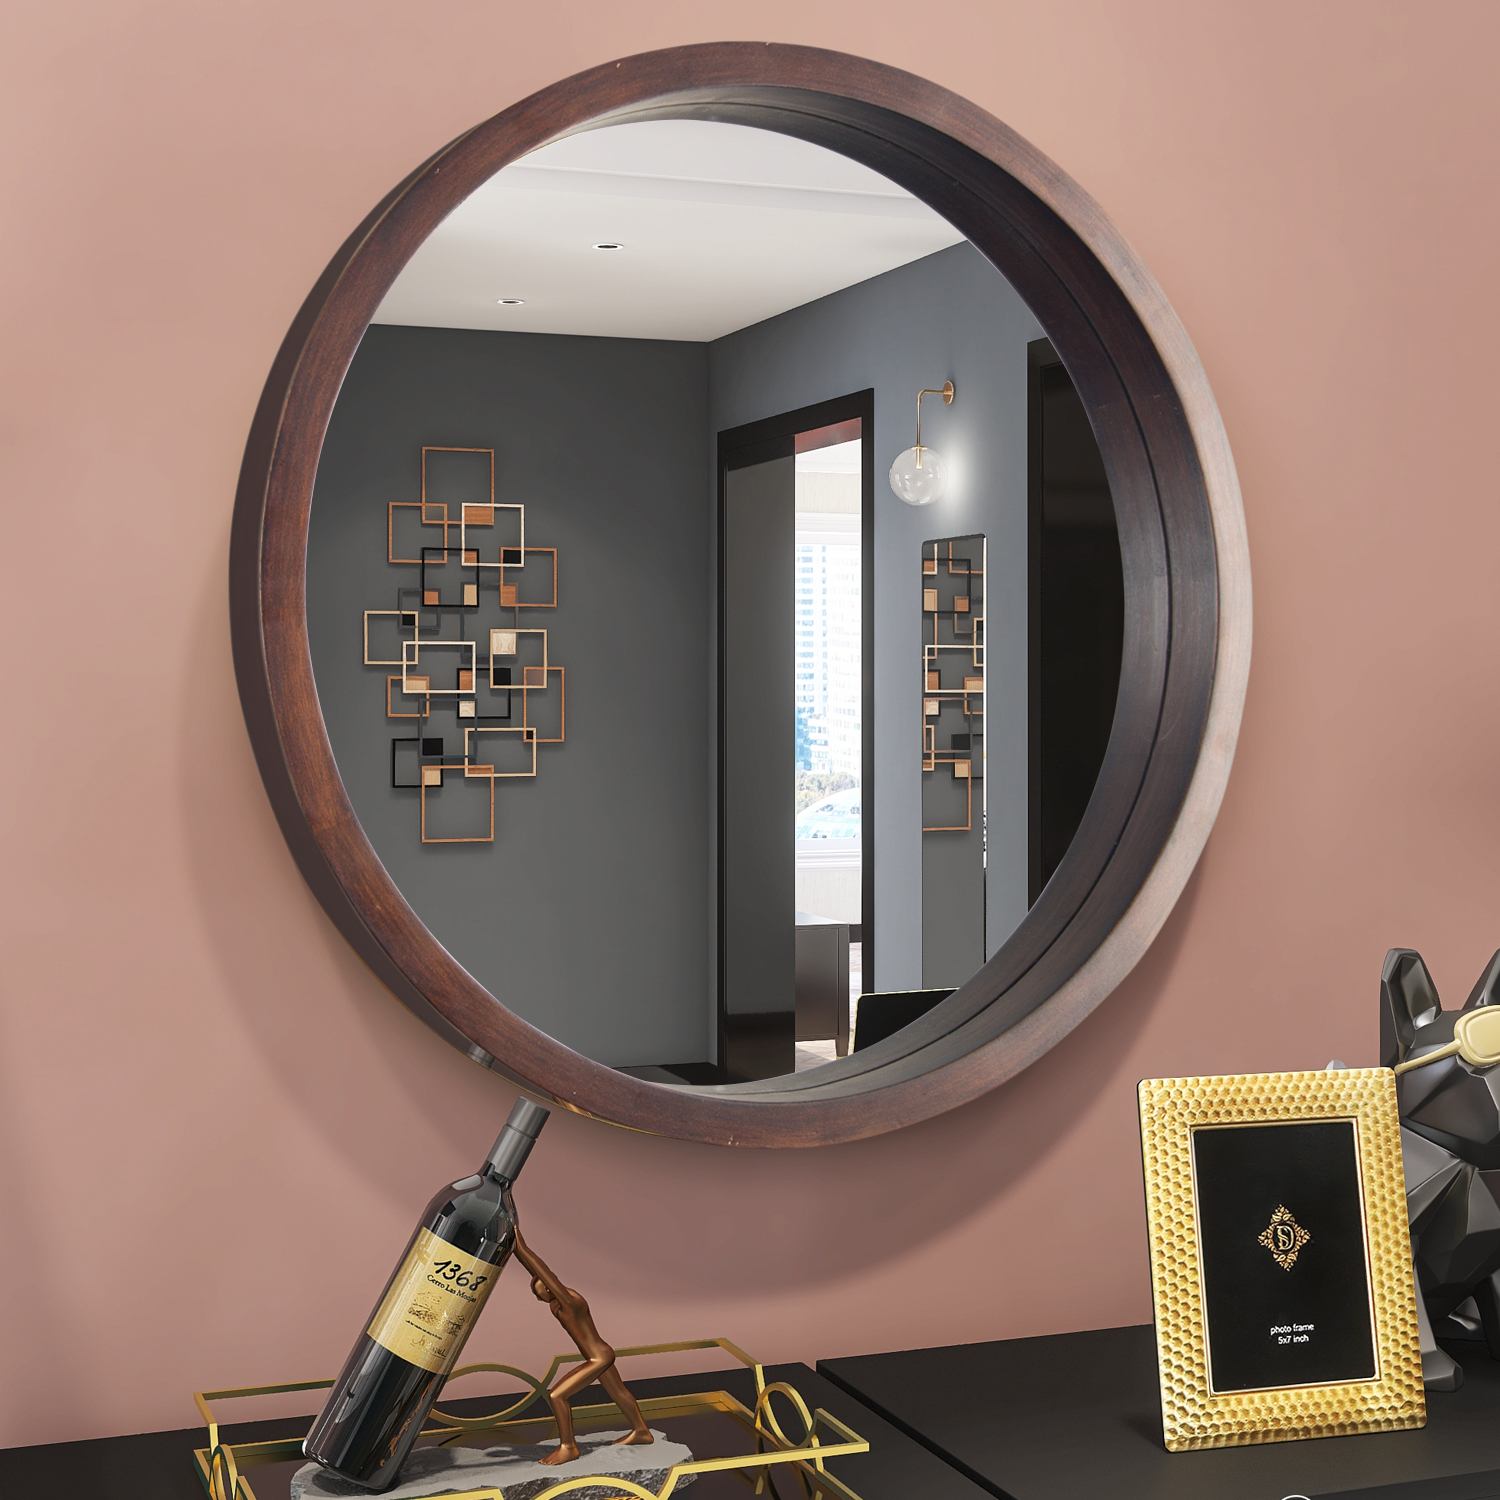 30" Round Wall-mounted Mirror with Wood Frame, for Bathroom, Bedroom, Entrance, Powder Room - Brown